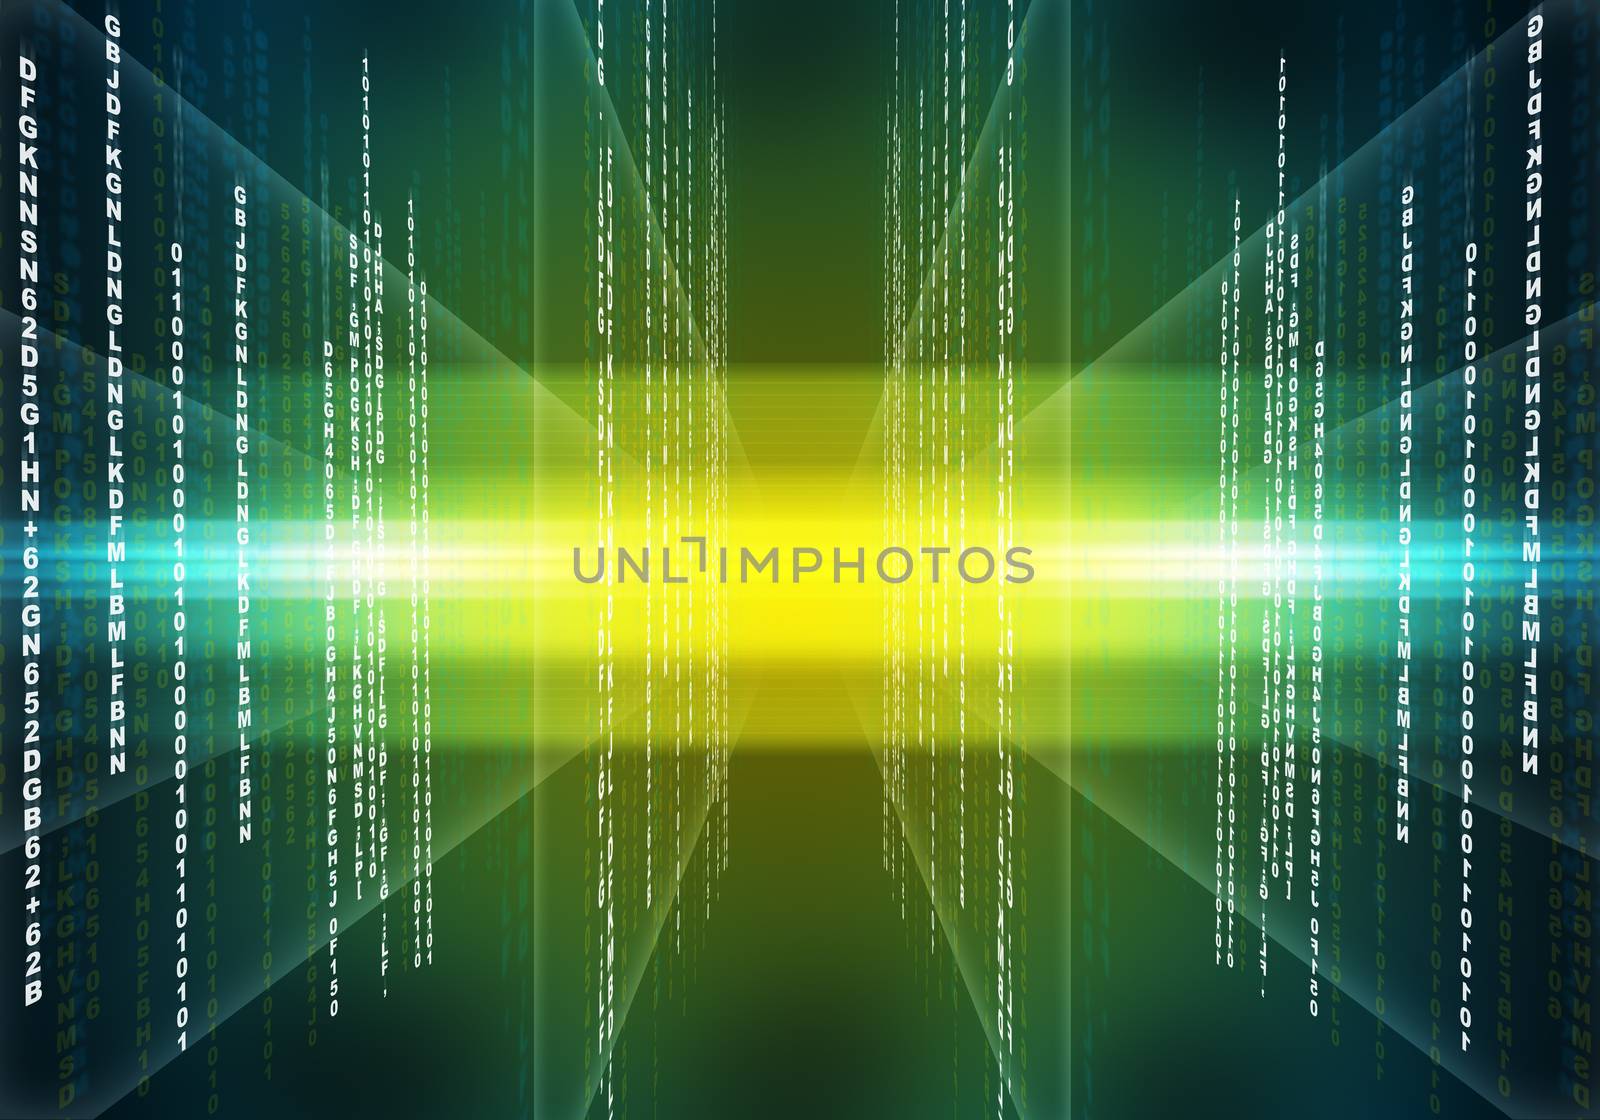 Abstract yellow and green background with light spots and numbers